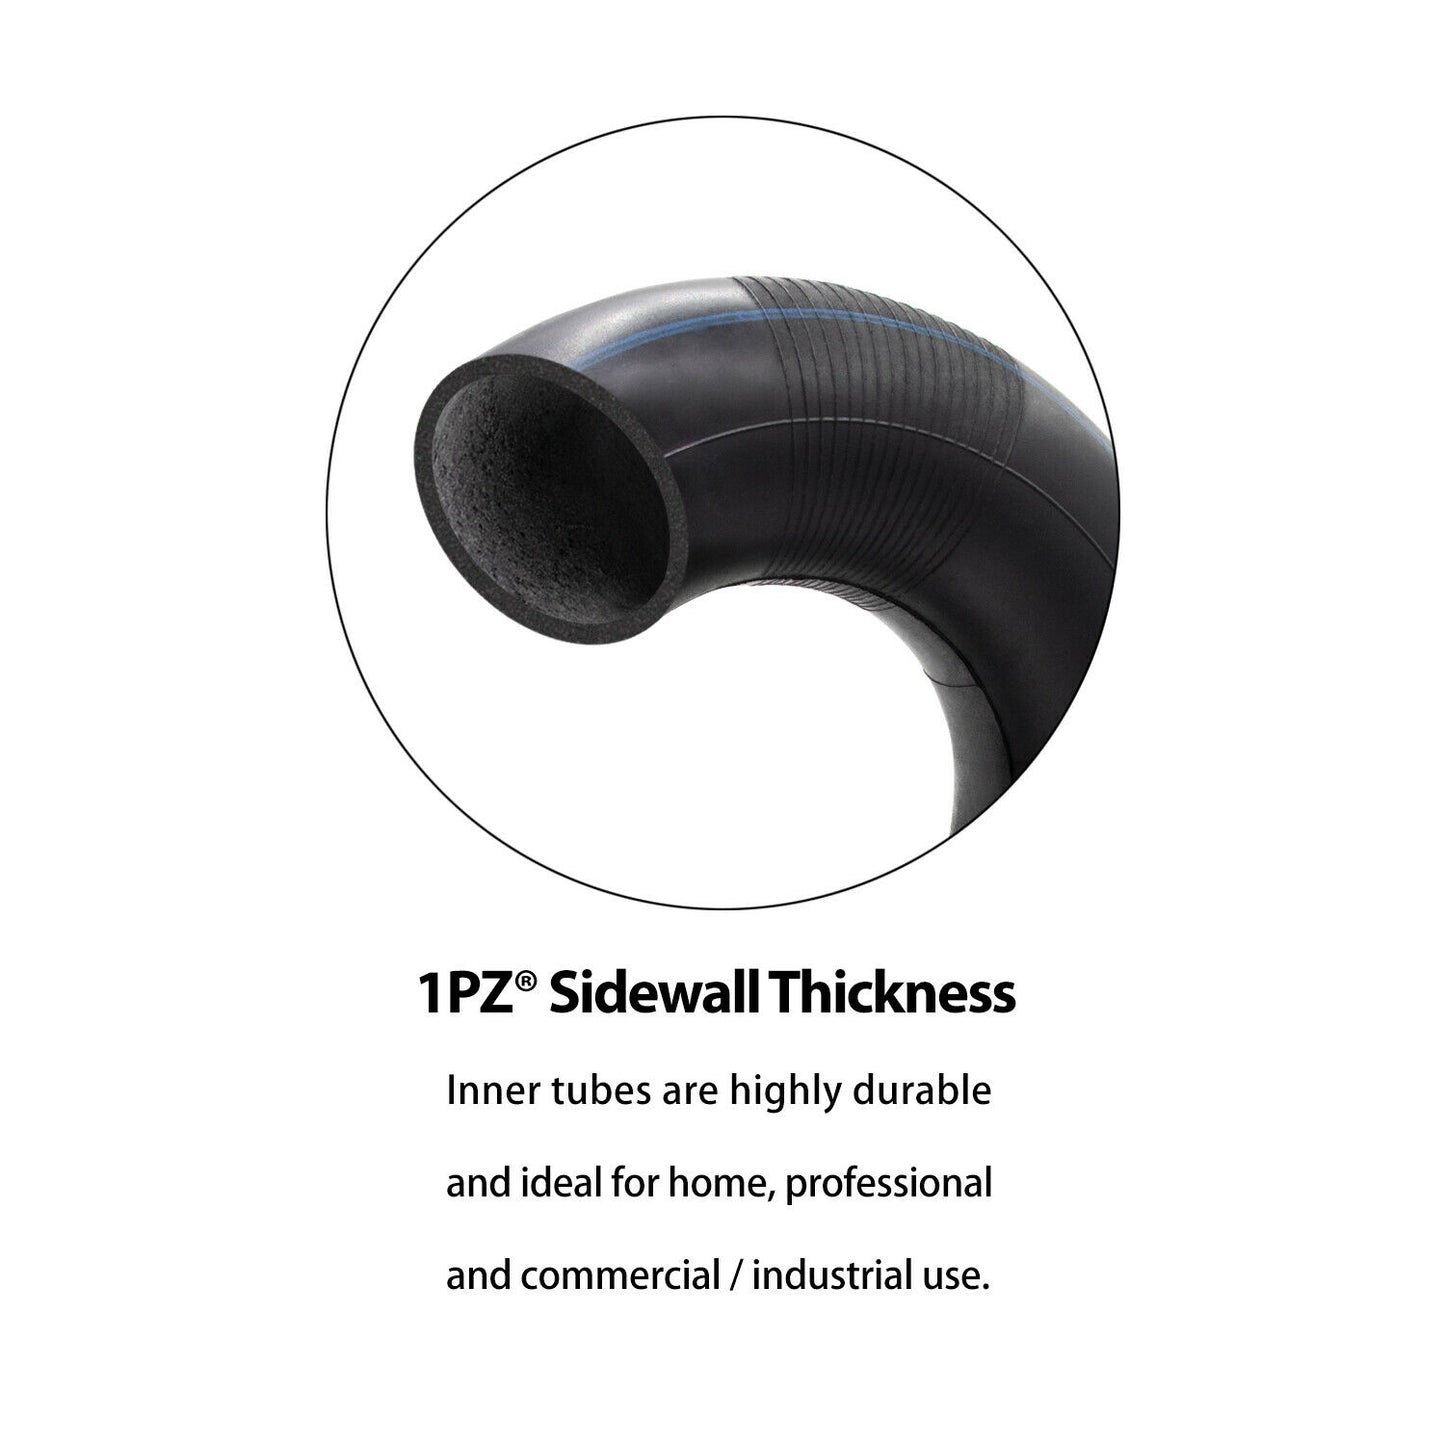 1PZ 3W4-X02 Heavy Duty 3.00-4 Inner Tube with TR87 bent Valve for Razor E300 E325 Scooter ATV Wheelbarrows Tractors Mowers Utility Dolly Hand Truck Generator Cart Mobility Scooter